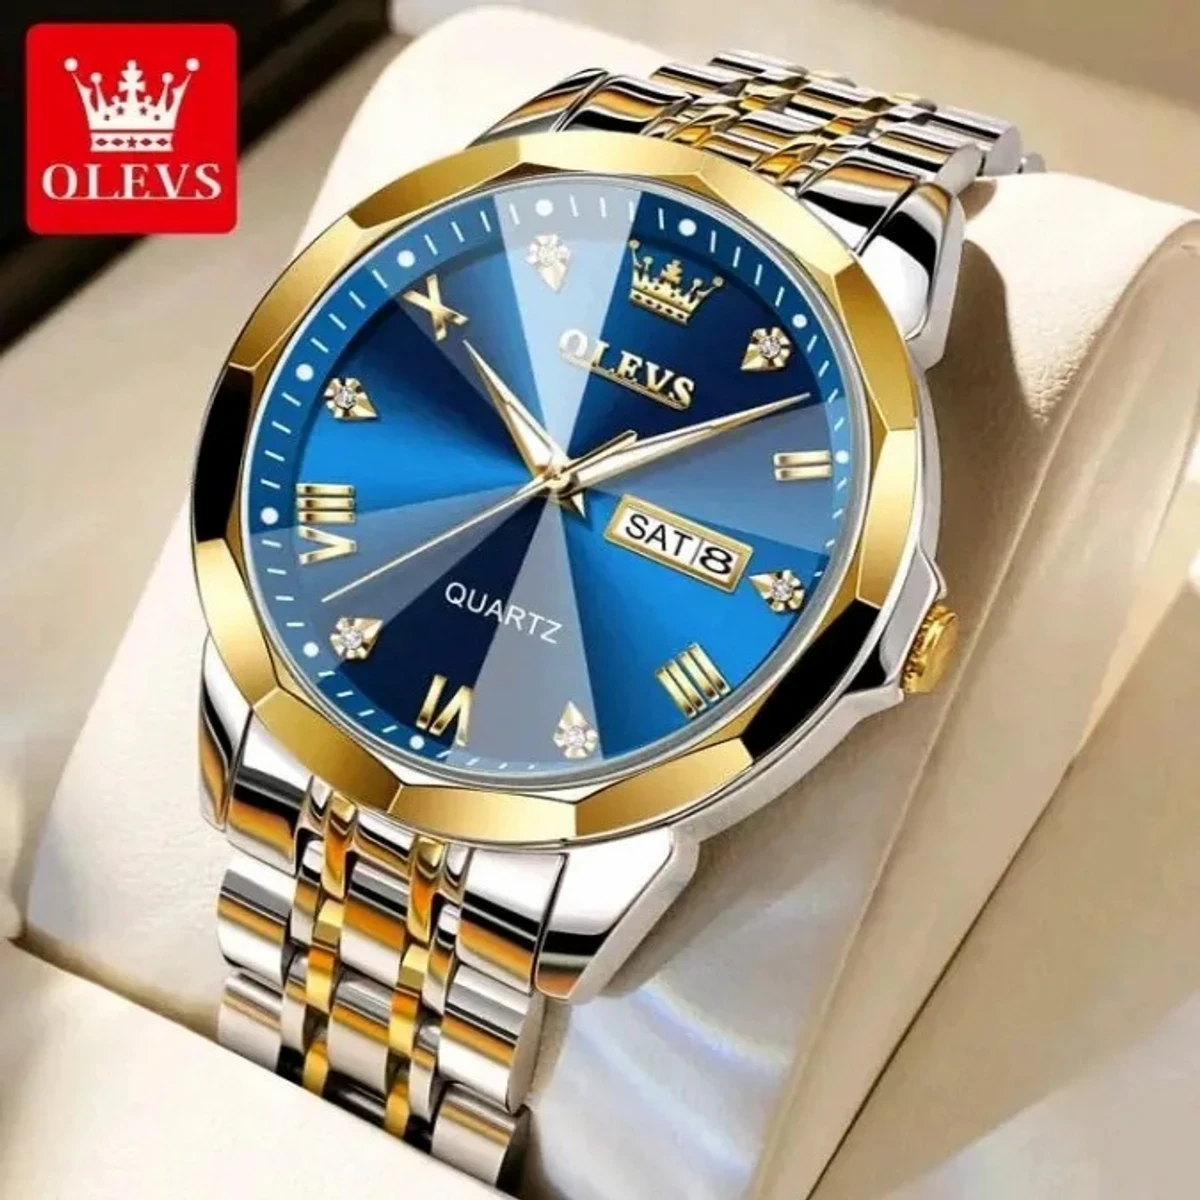 OLEVS MODEL 9931 Watch for Men Stainless Steel Watches - 9941 TOTON AR DIAL BLUE ROUND GOLDEN - - MAN WATCH -  LOCK PUSH